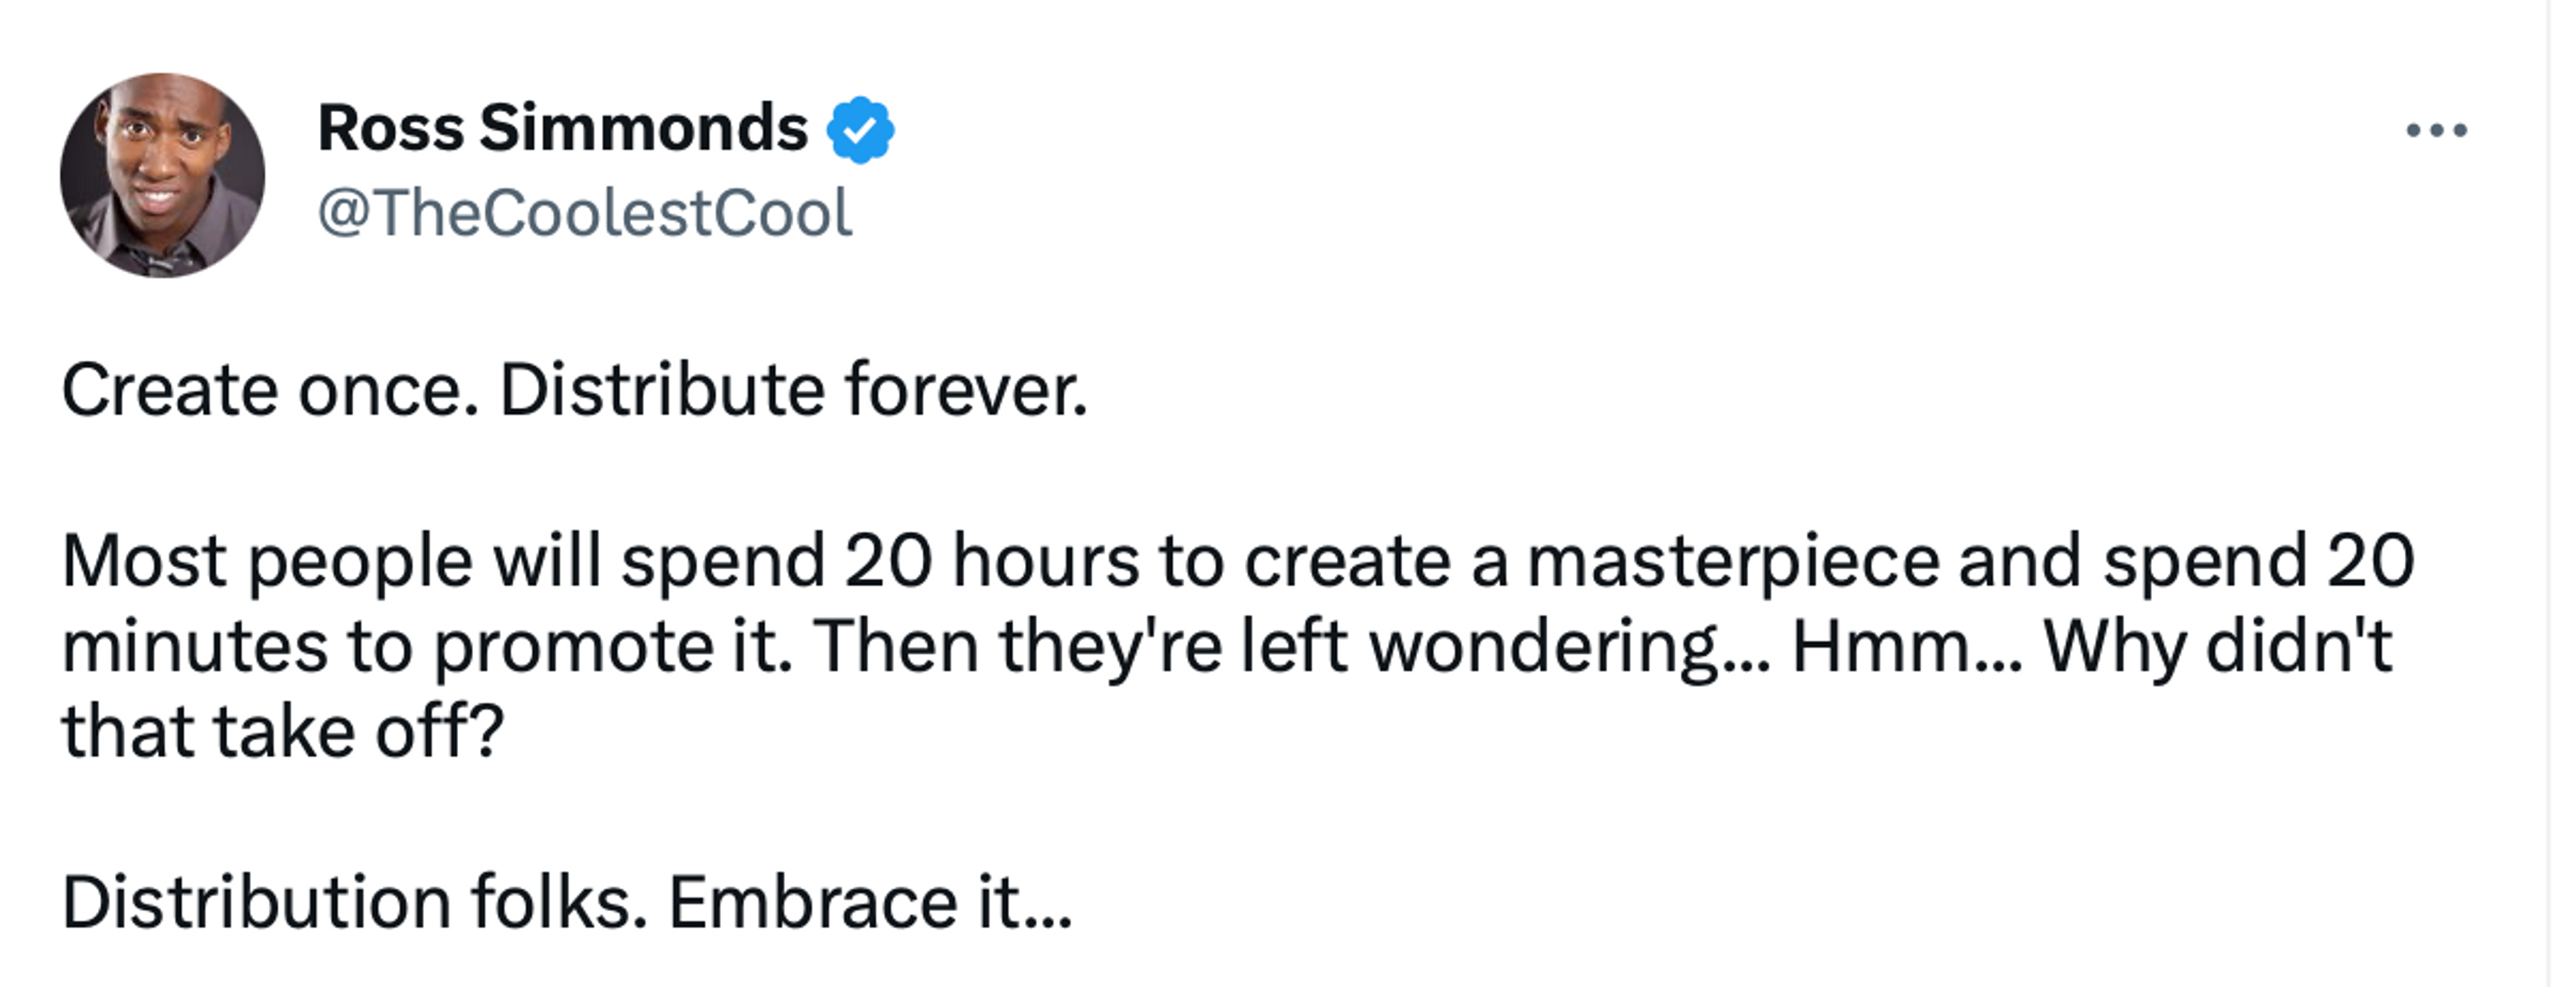 A tweet from Ross Simmonds that reads: Create once. Distribute forever. Most people will spend 20 hours to create a masterpiece and spend 20 minutes to promote it. Then they're left wondering... Hmm... Why didn't that take off? Distribution folks. Embrace it...